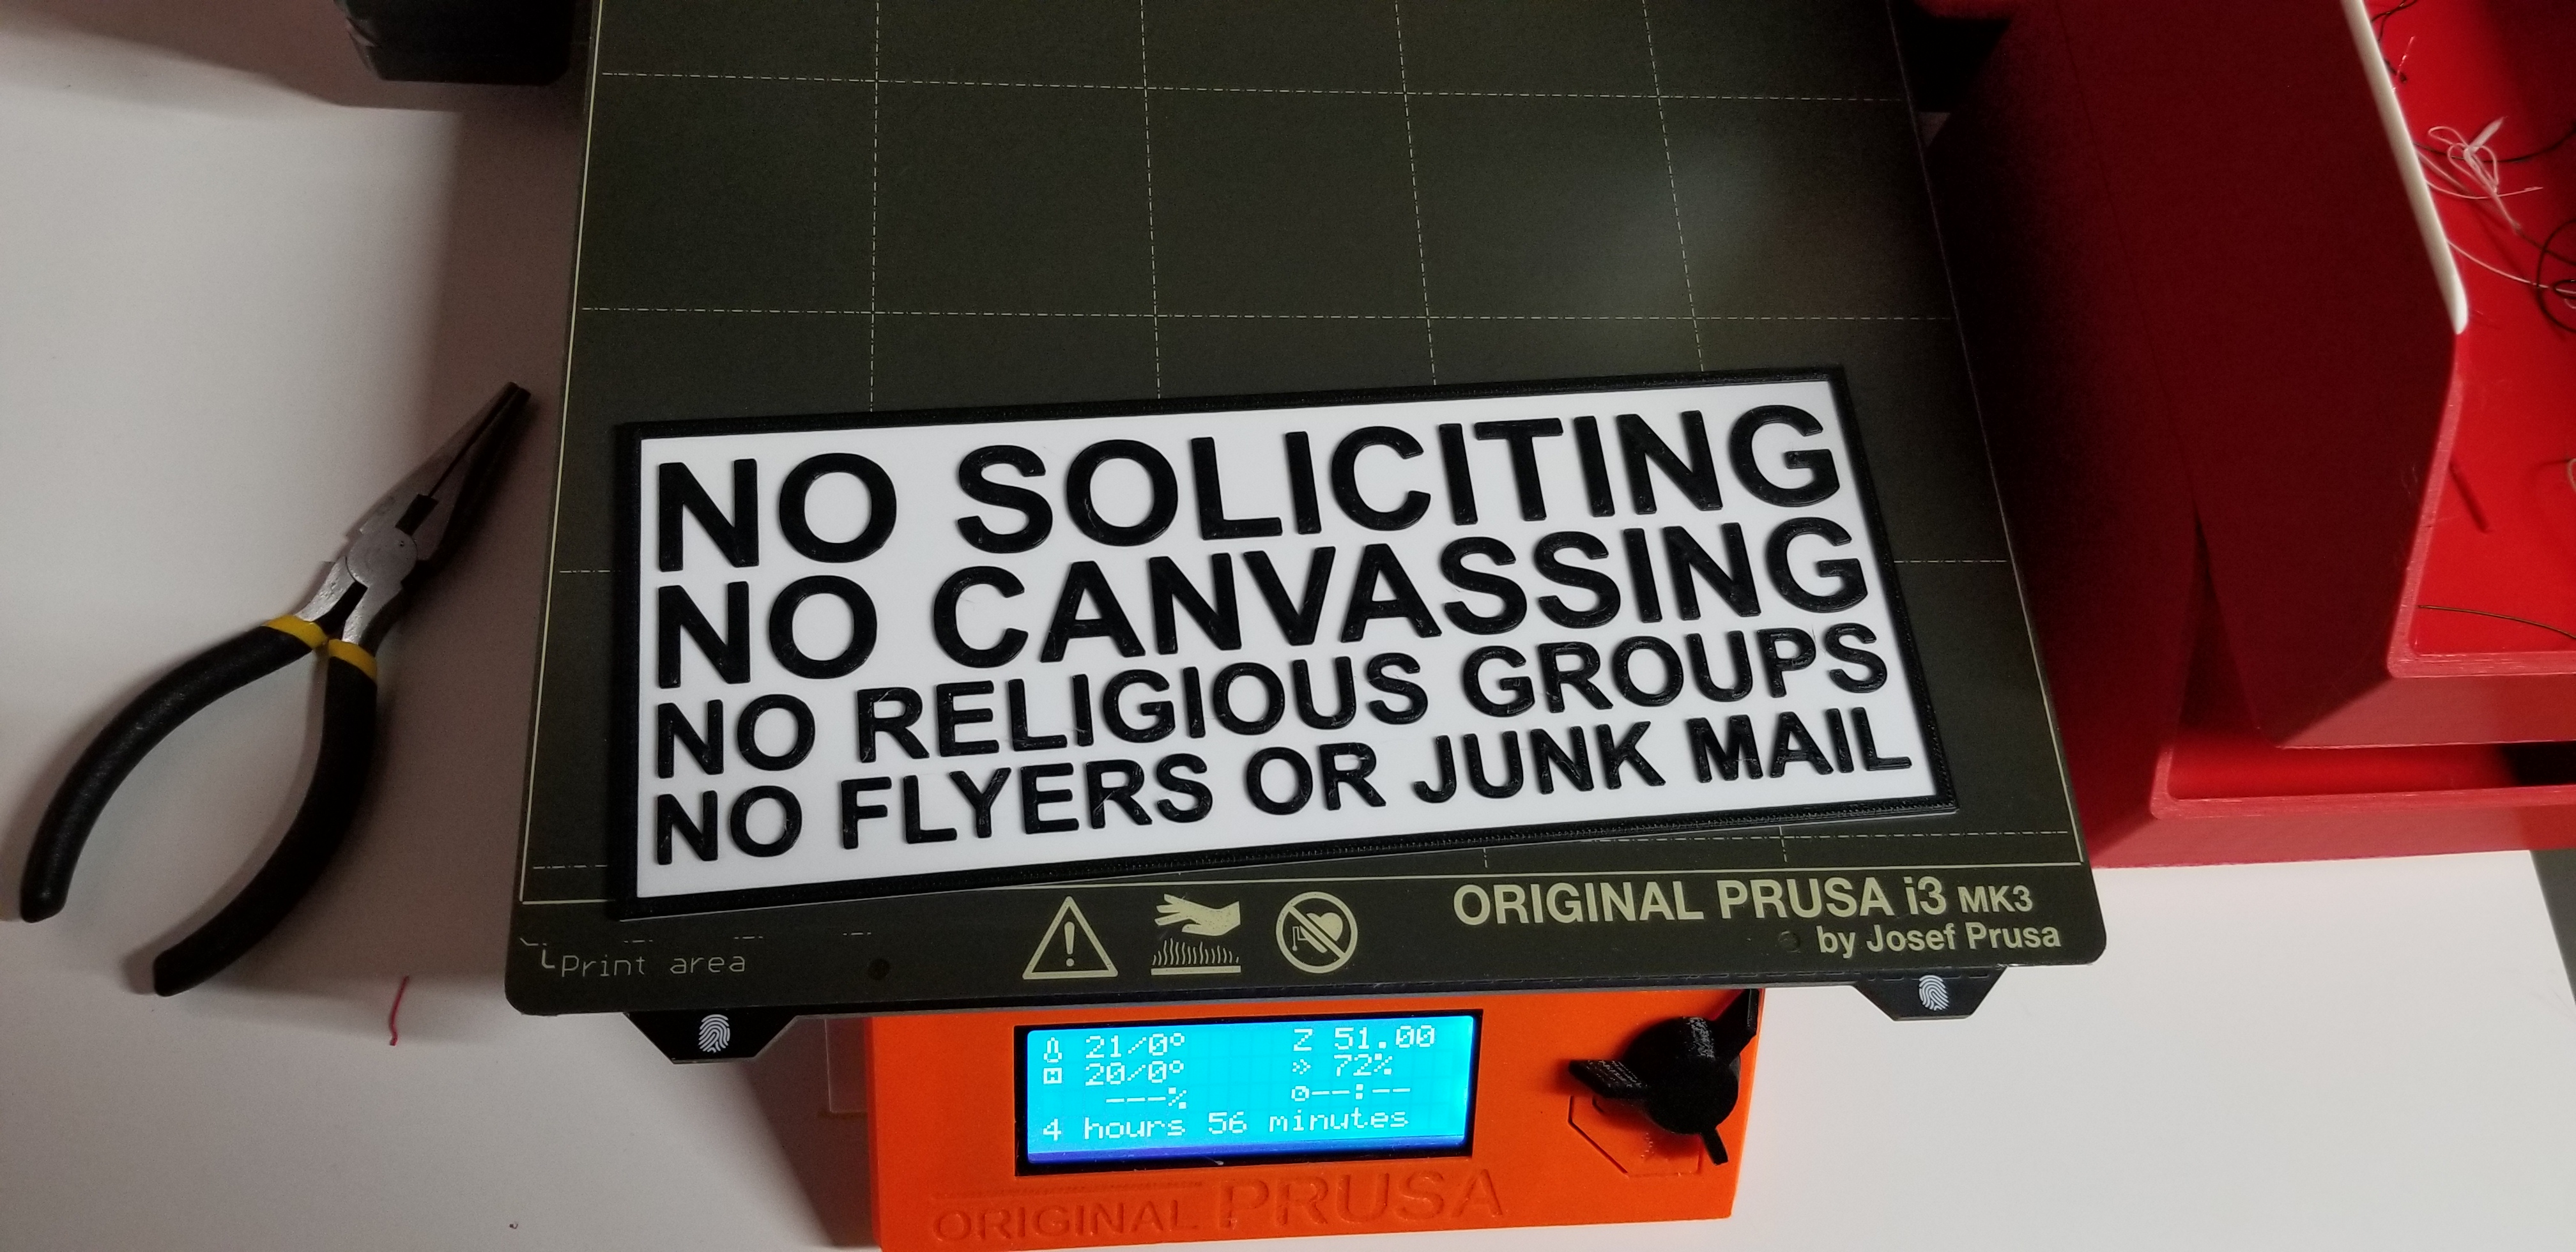 No soliciting, no canvassing, no religious groups, no flyers or junk mail sign.